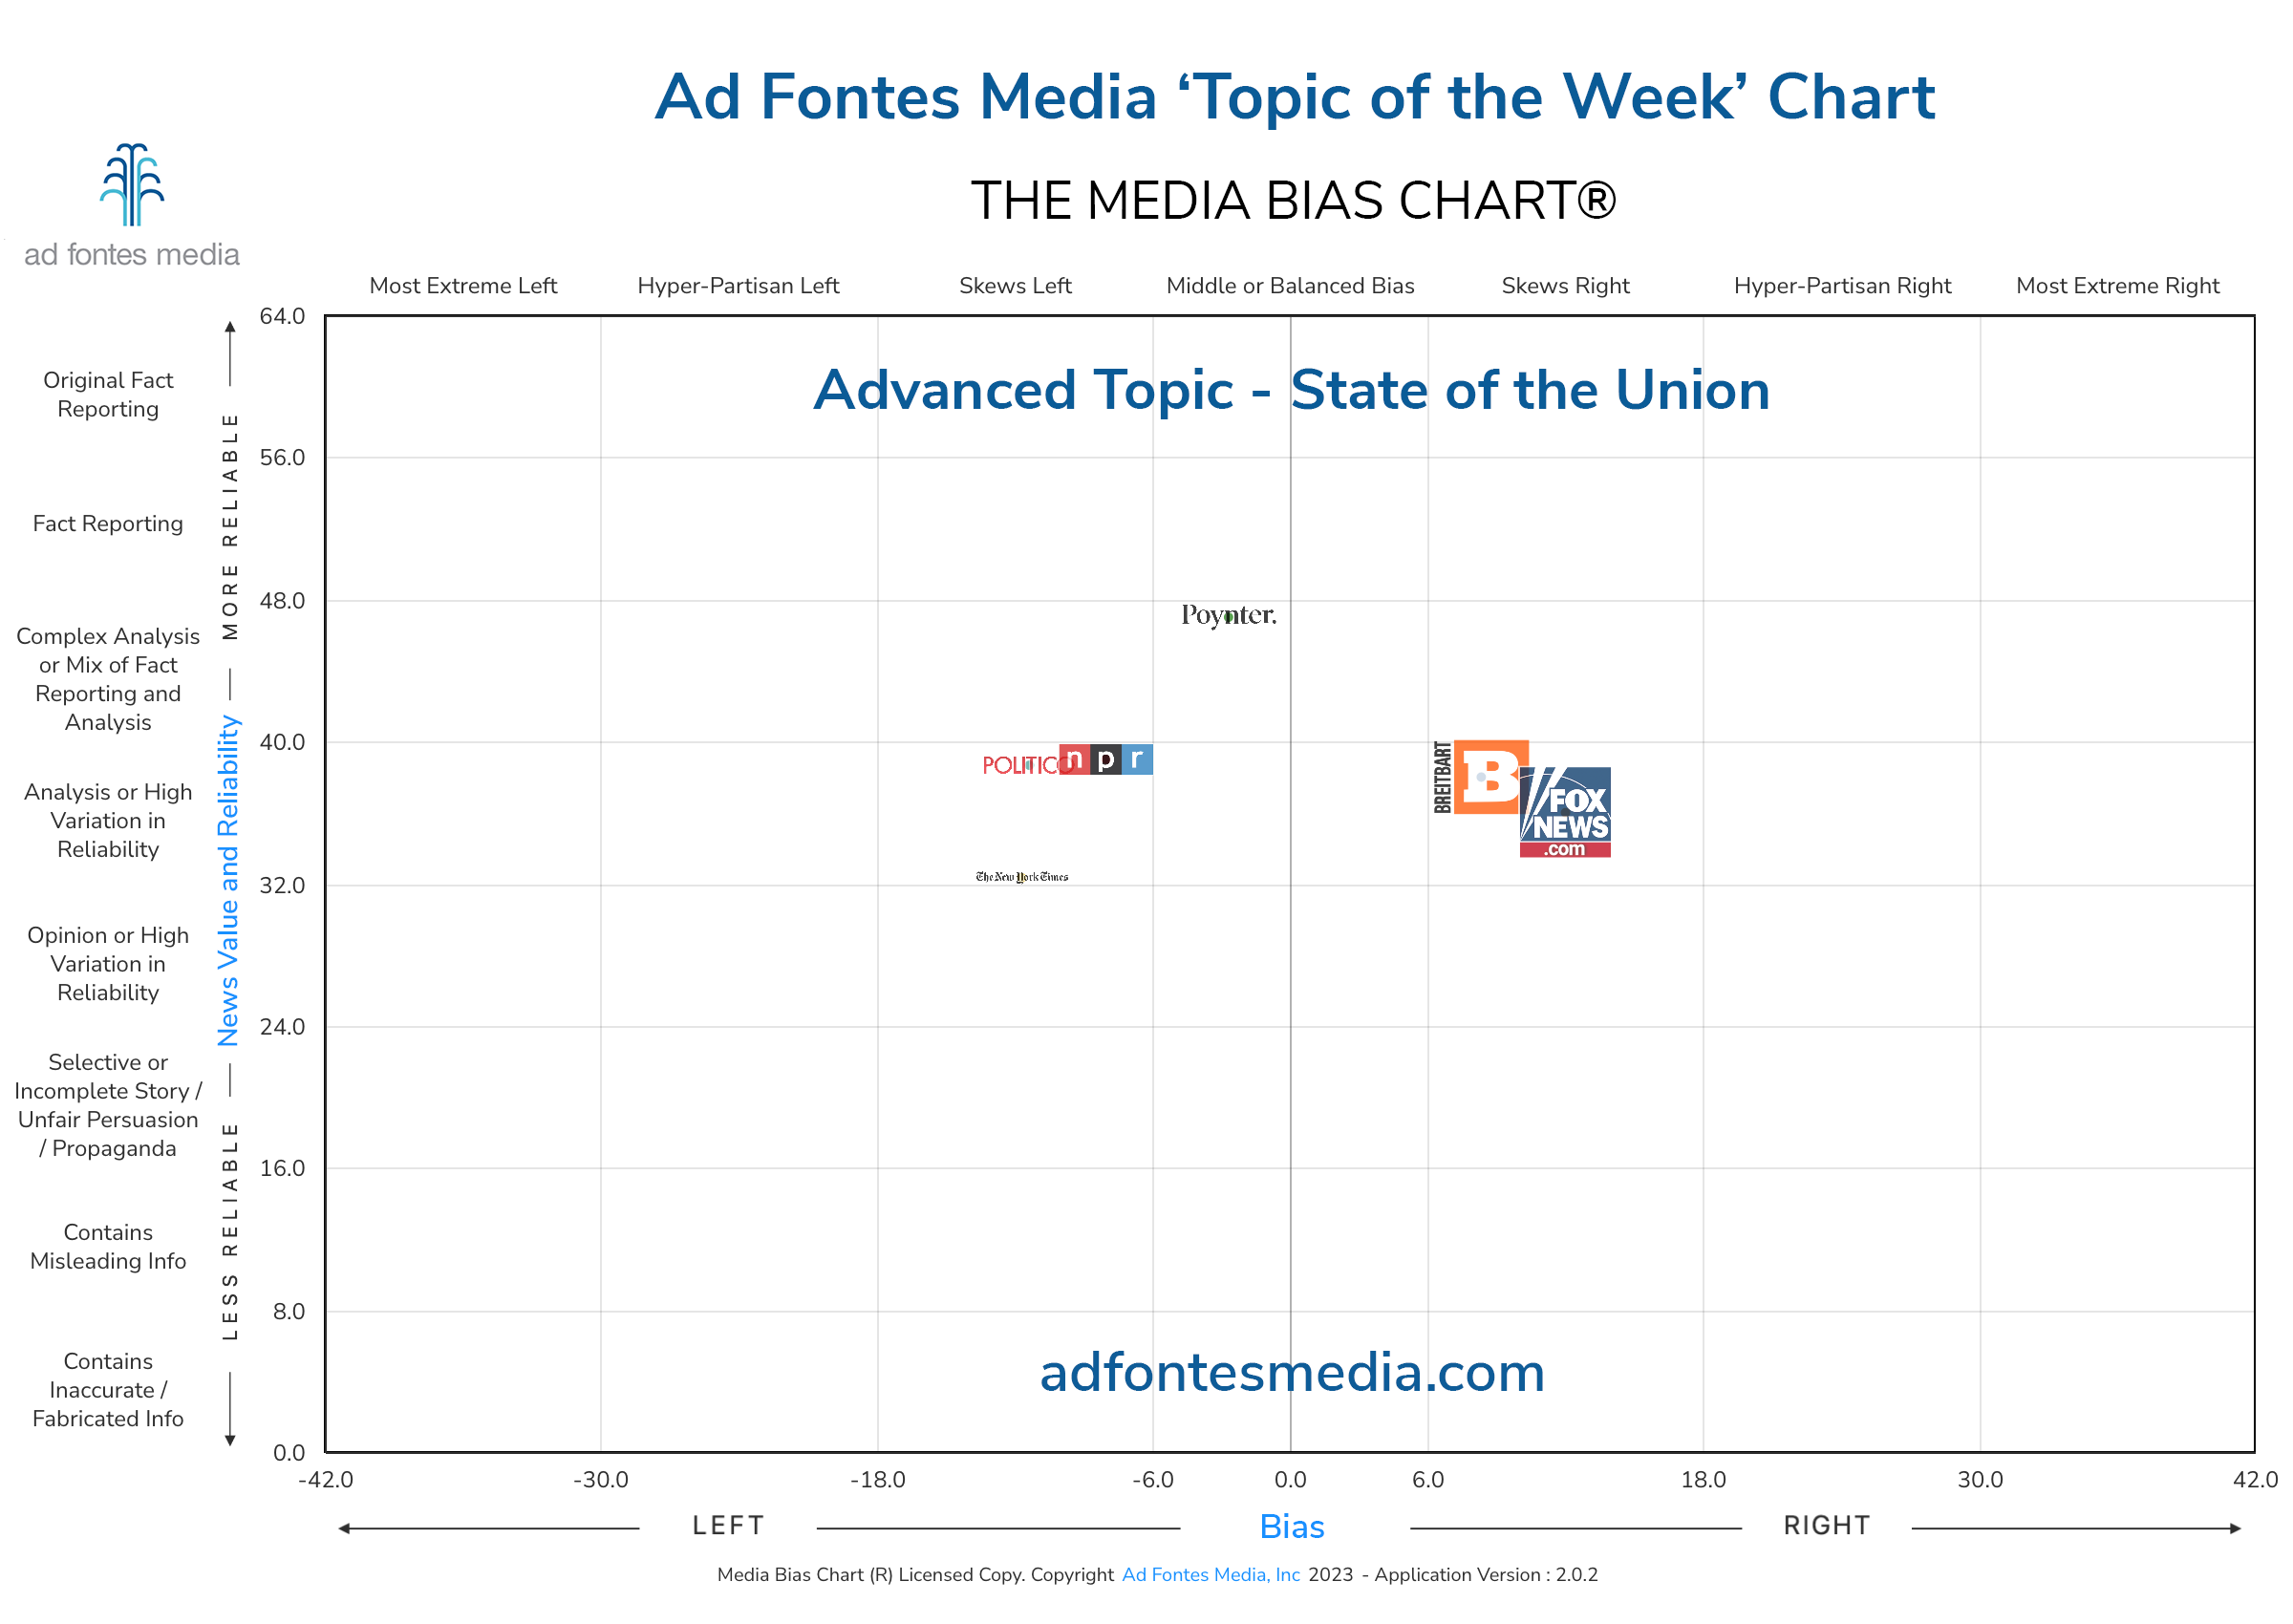 Scores of the State of the Union articles on the chart